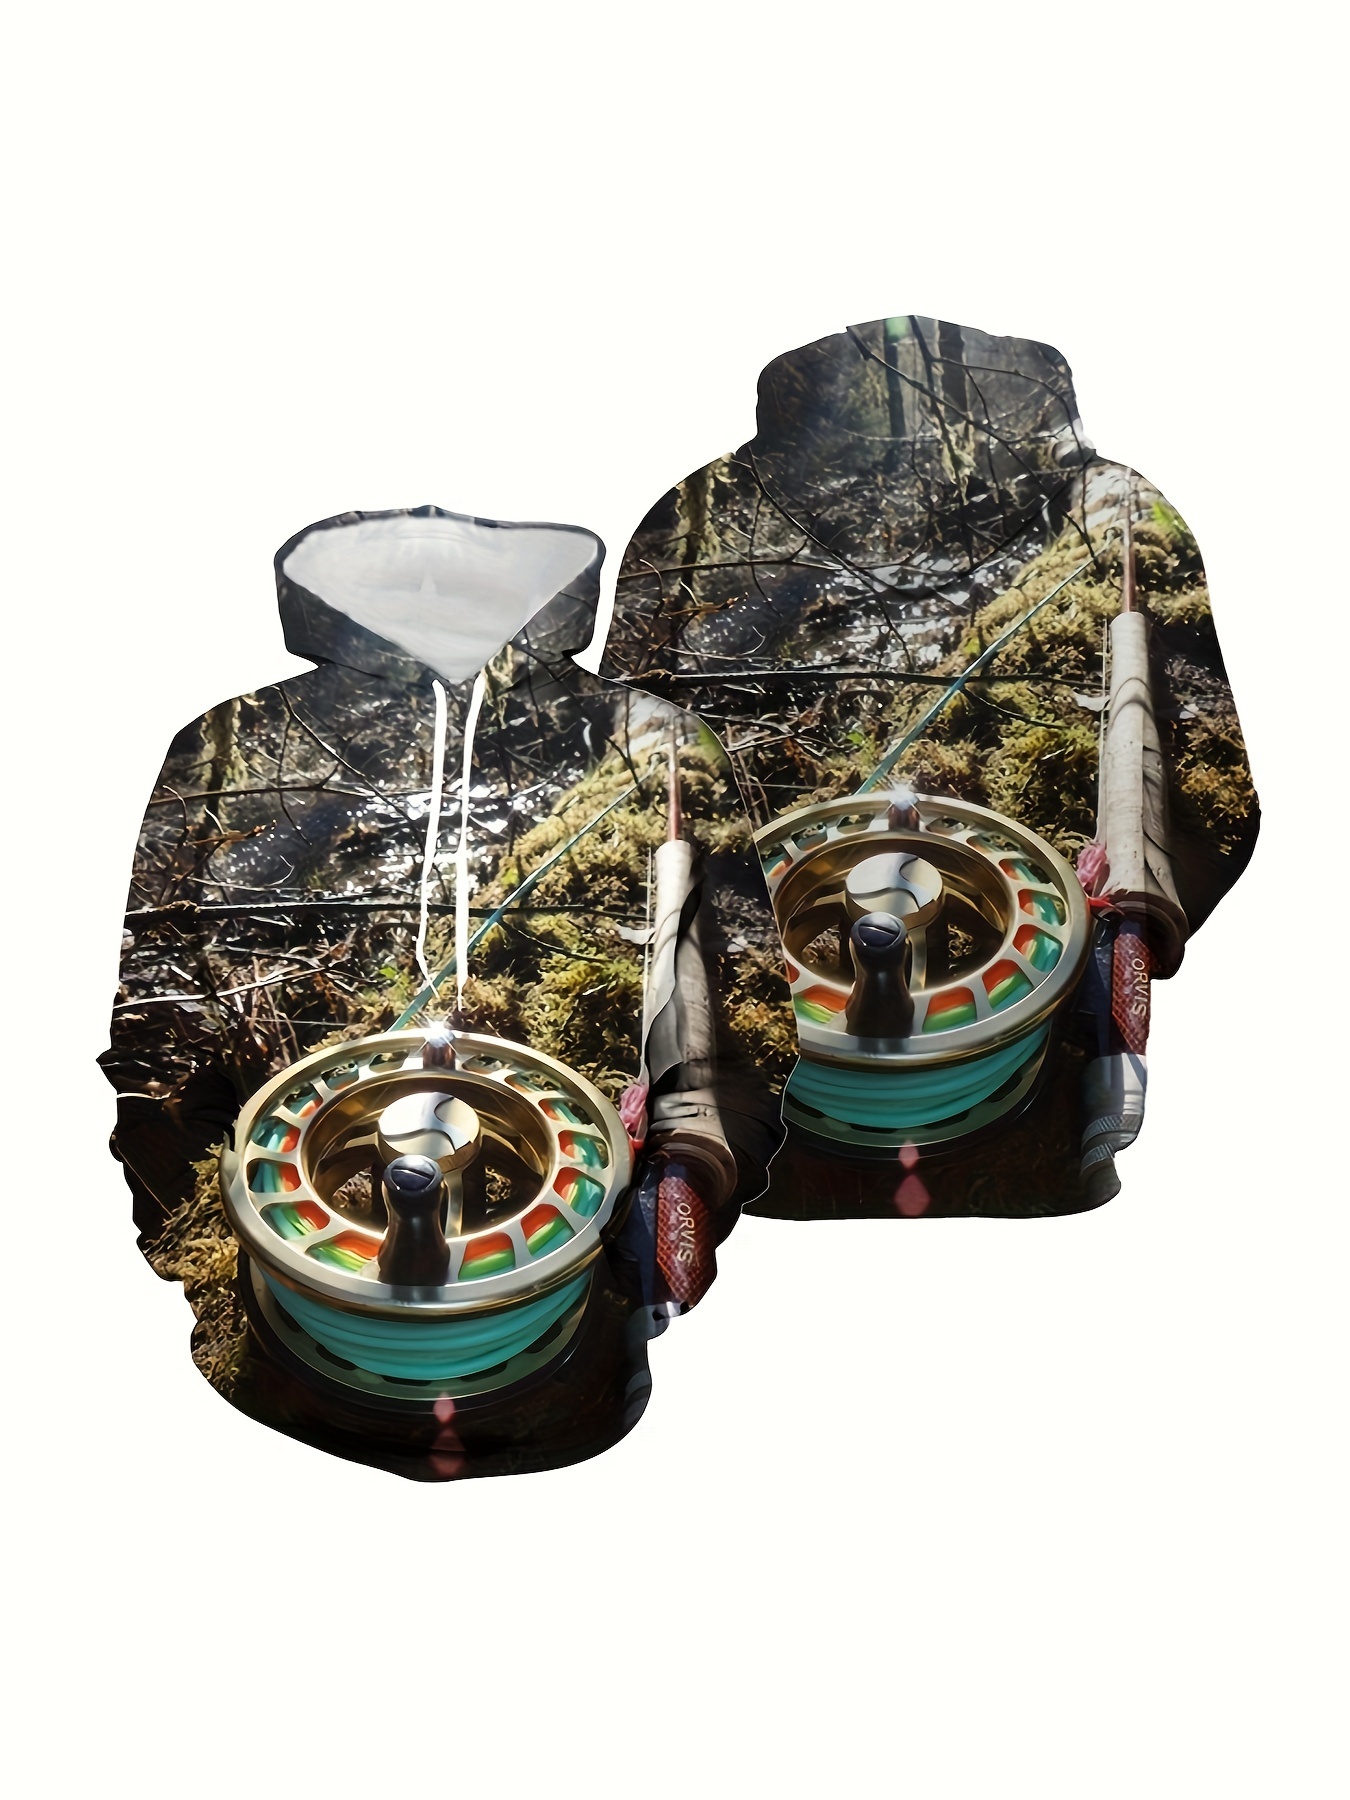 Bass Fishing All Over Print Hoodie For Men And Women Best Gift -  Freedomdesign